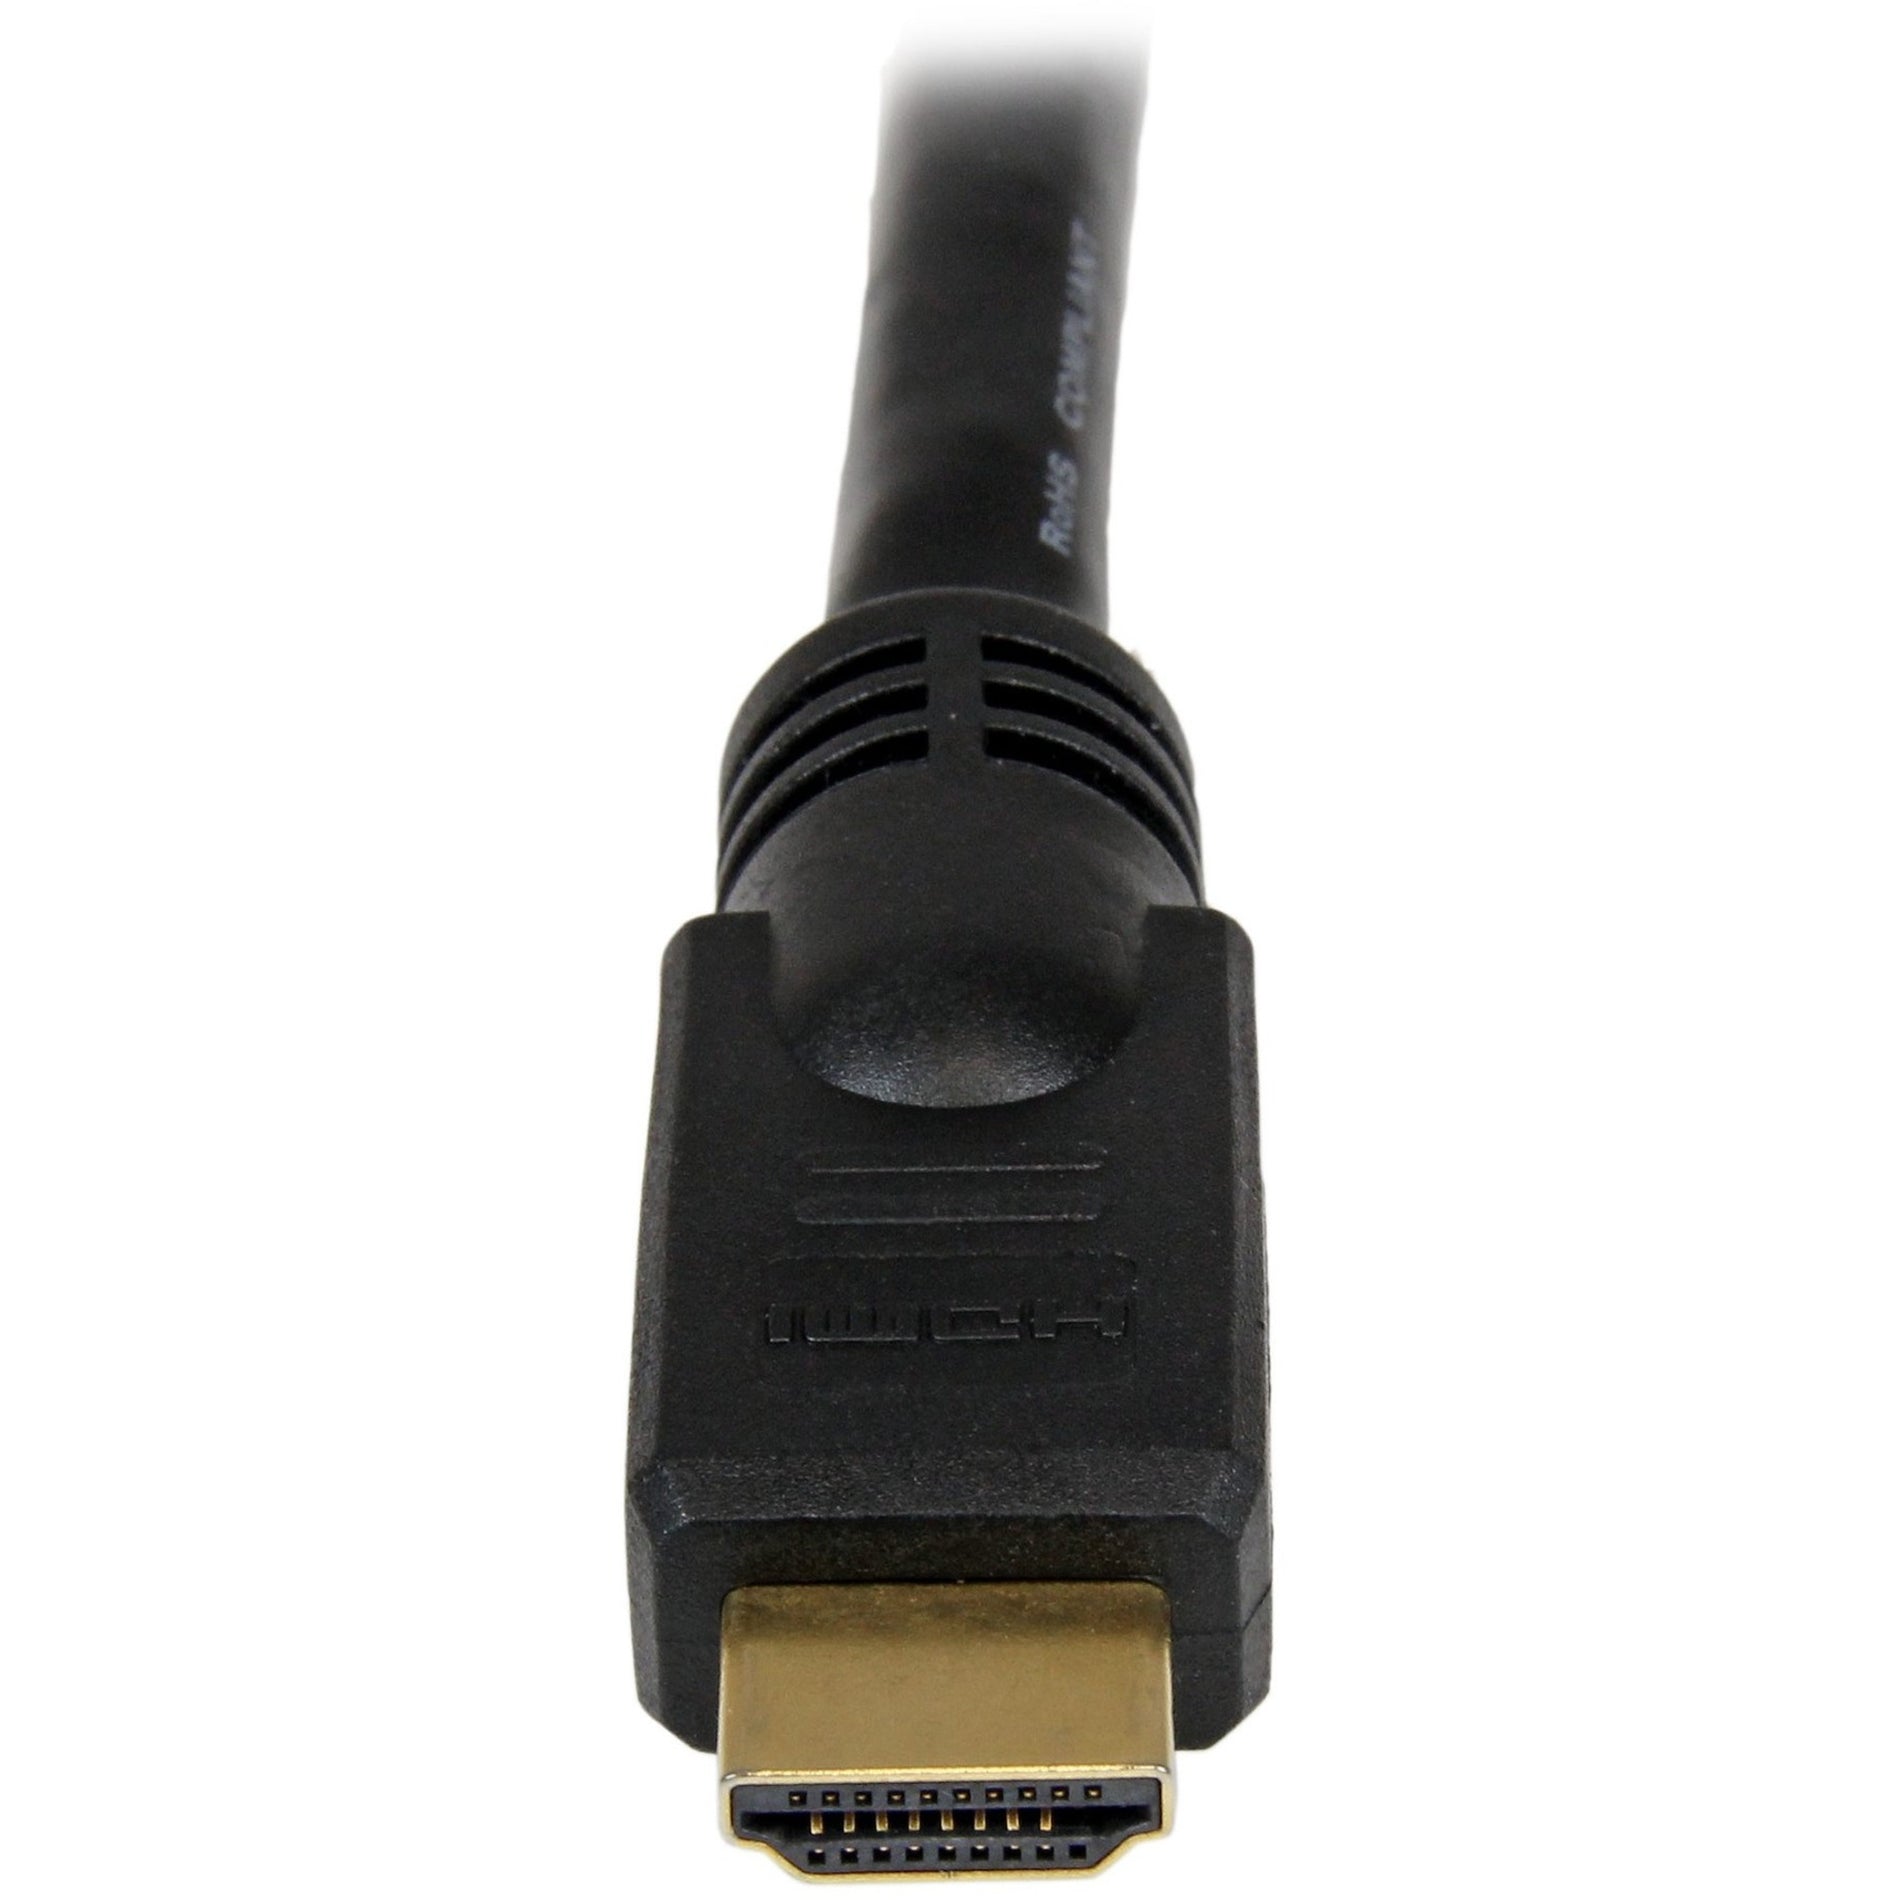 StarTech.com HDMM35 35 ft High Speed HDMI Cable - Ultra HD 4k x 2k HDMI Cable, Molded, Corrosion-free, Strain Relief, Gold Plated Connectors, Black